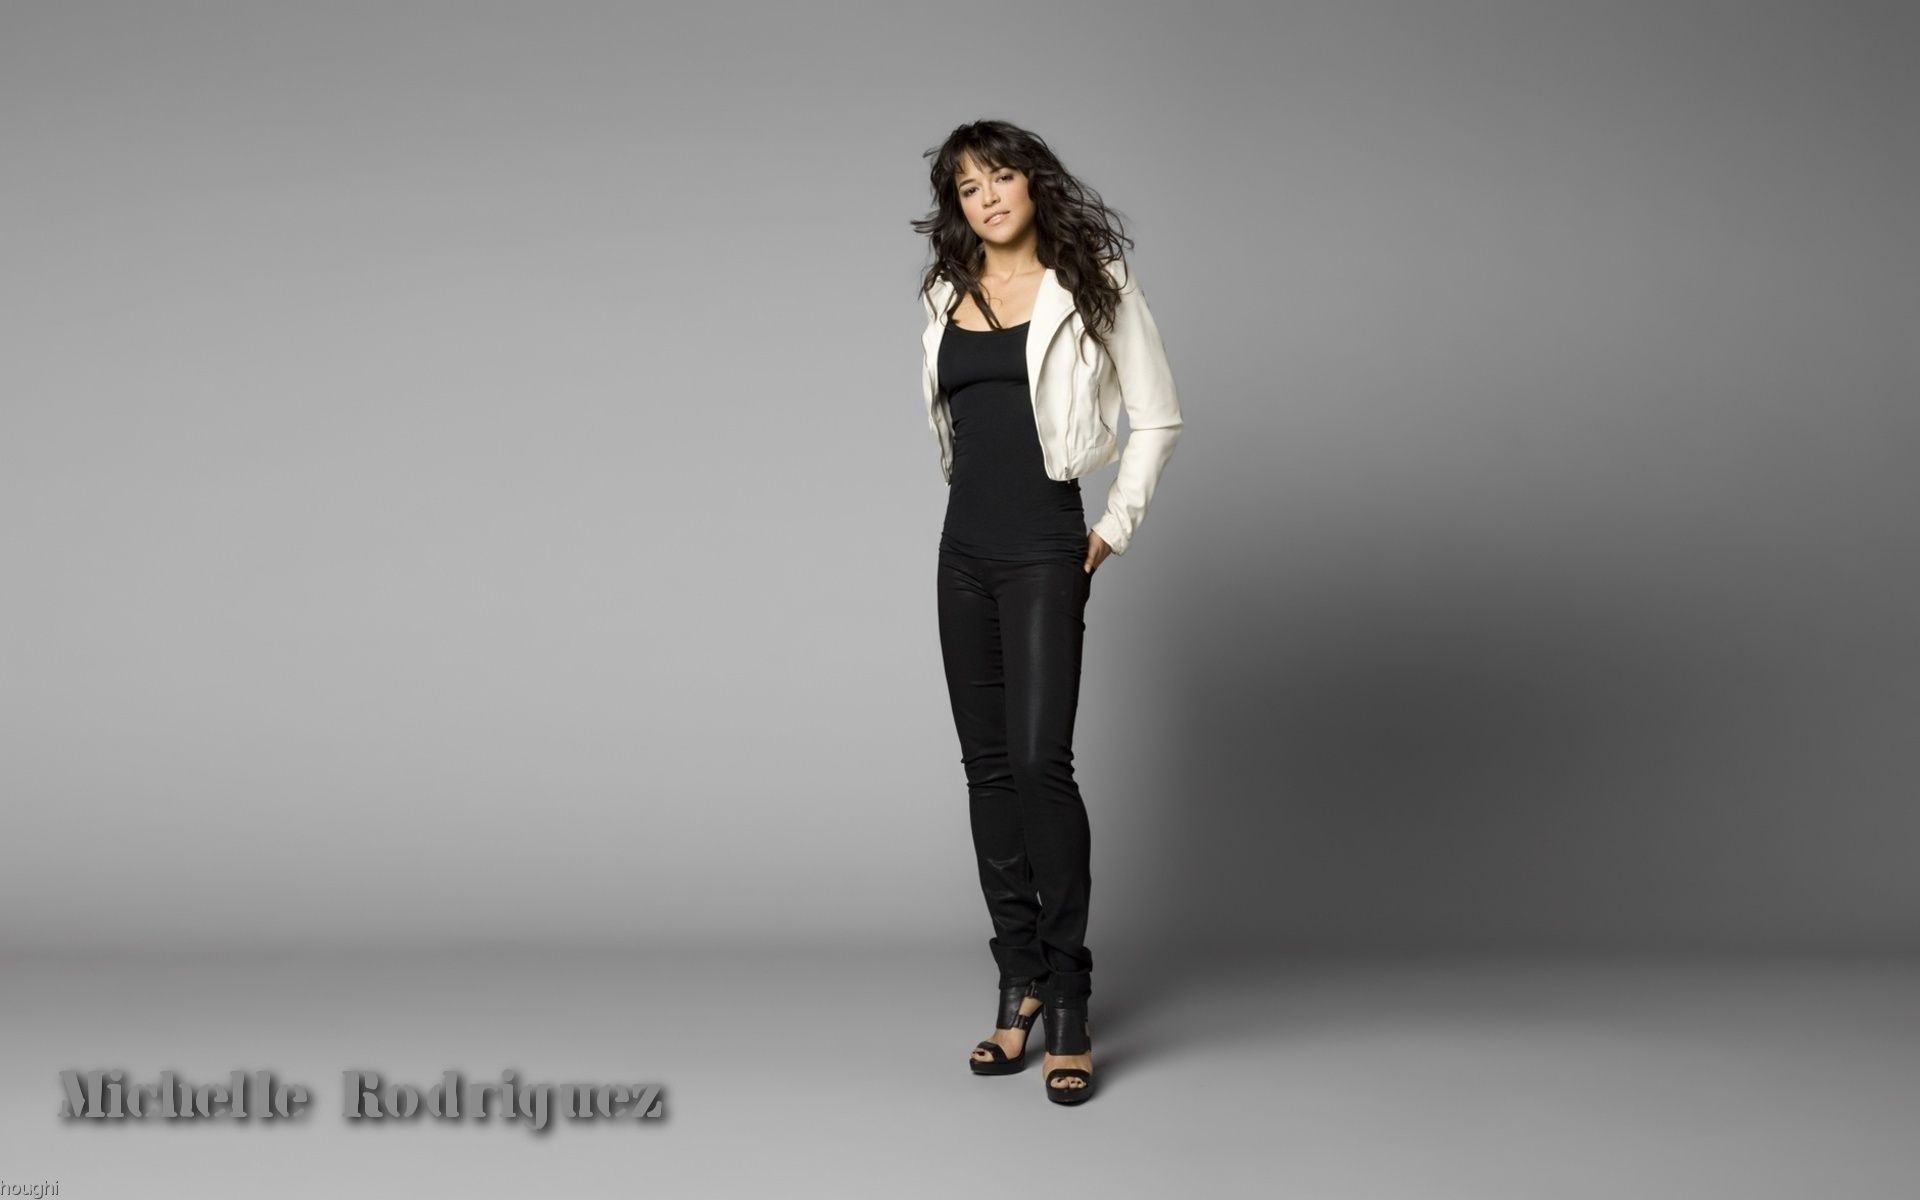 Michelle Rodriguez #011 - 1920x1200 Wallpapers Pictures Photos Images